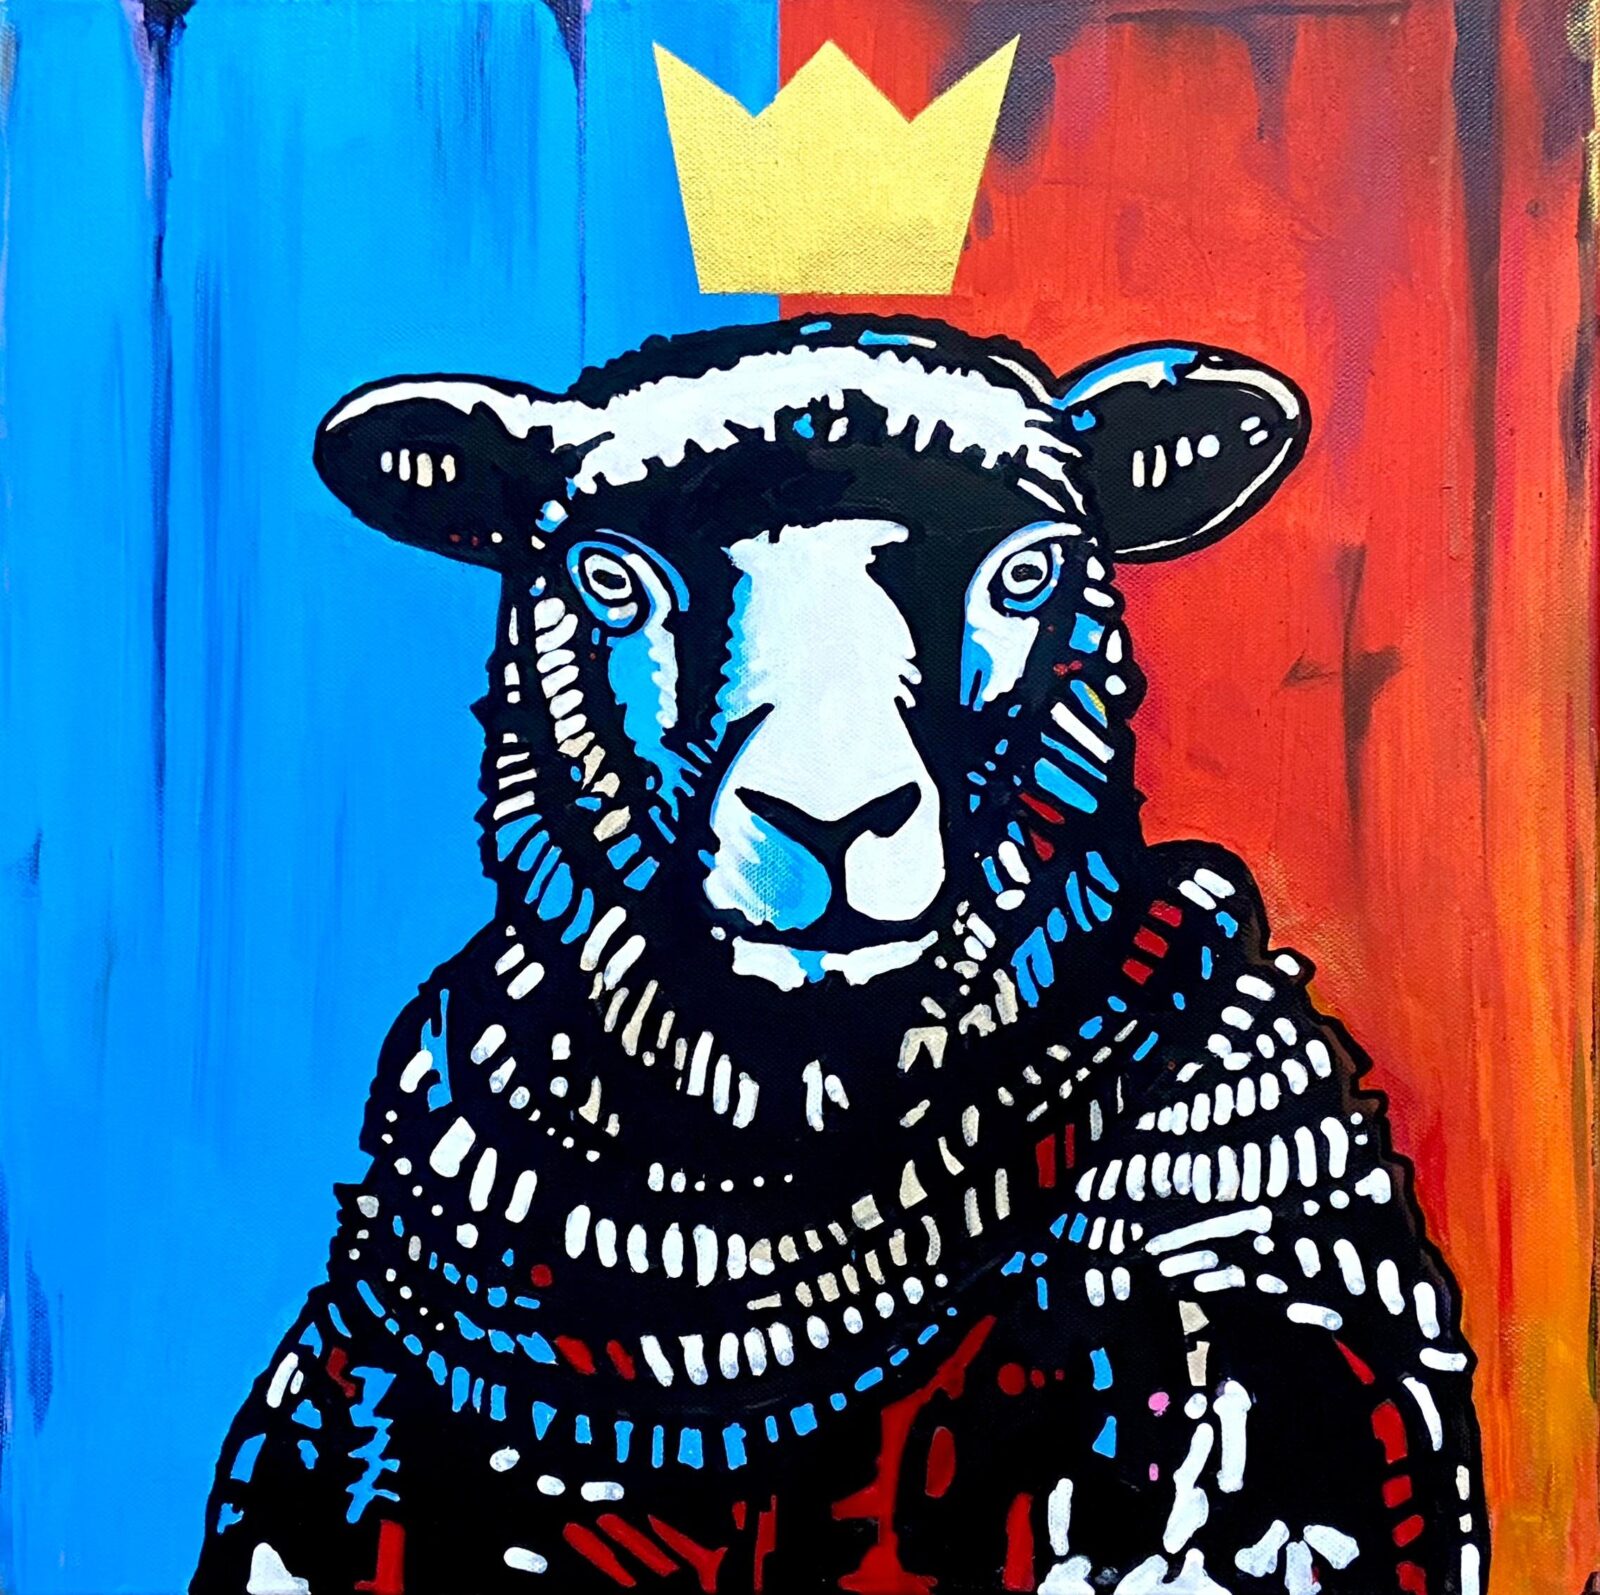 painting of a merino sheep wearing a gold crown against a blue and red background